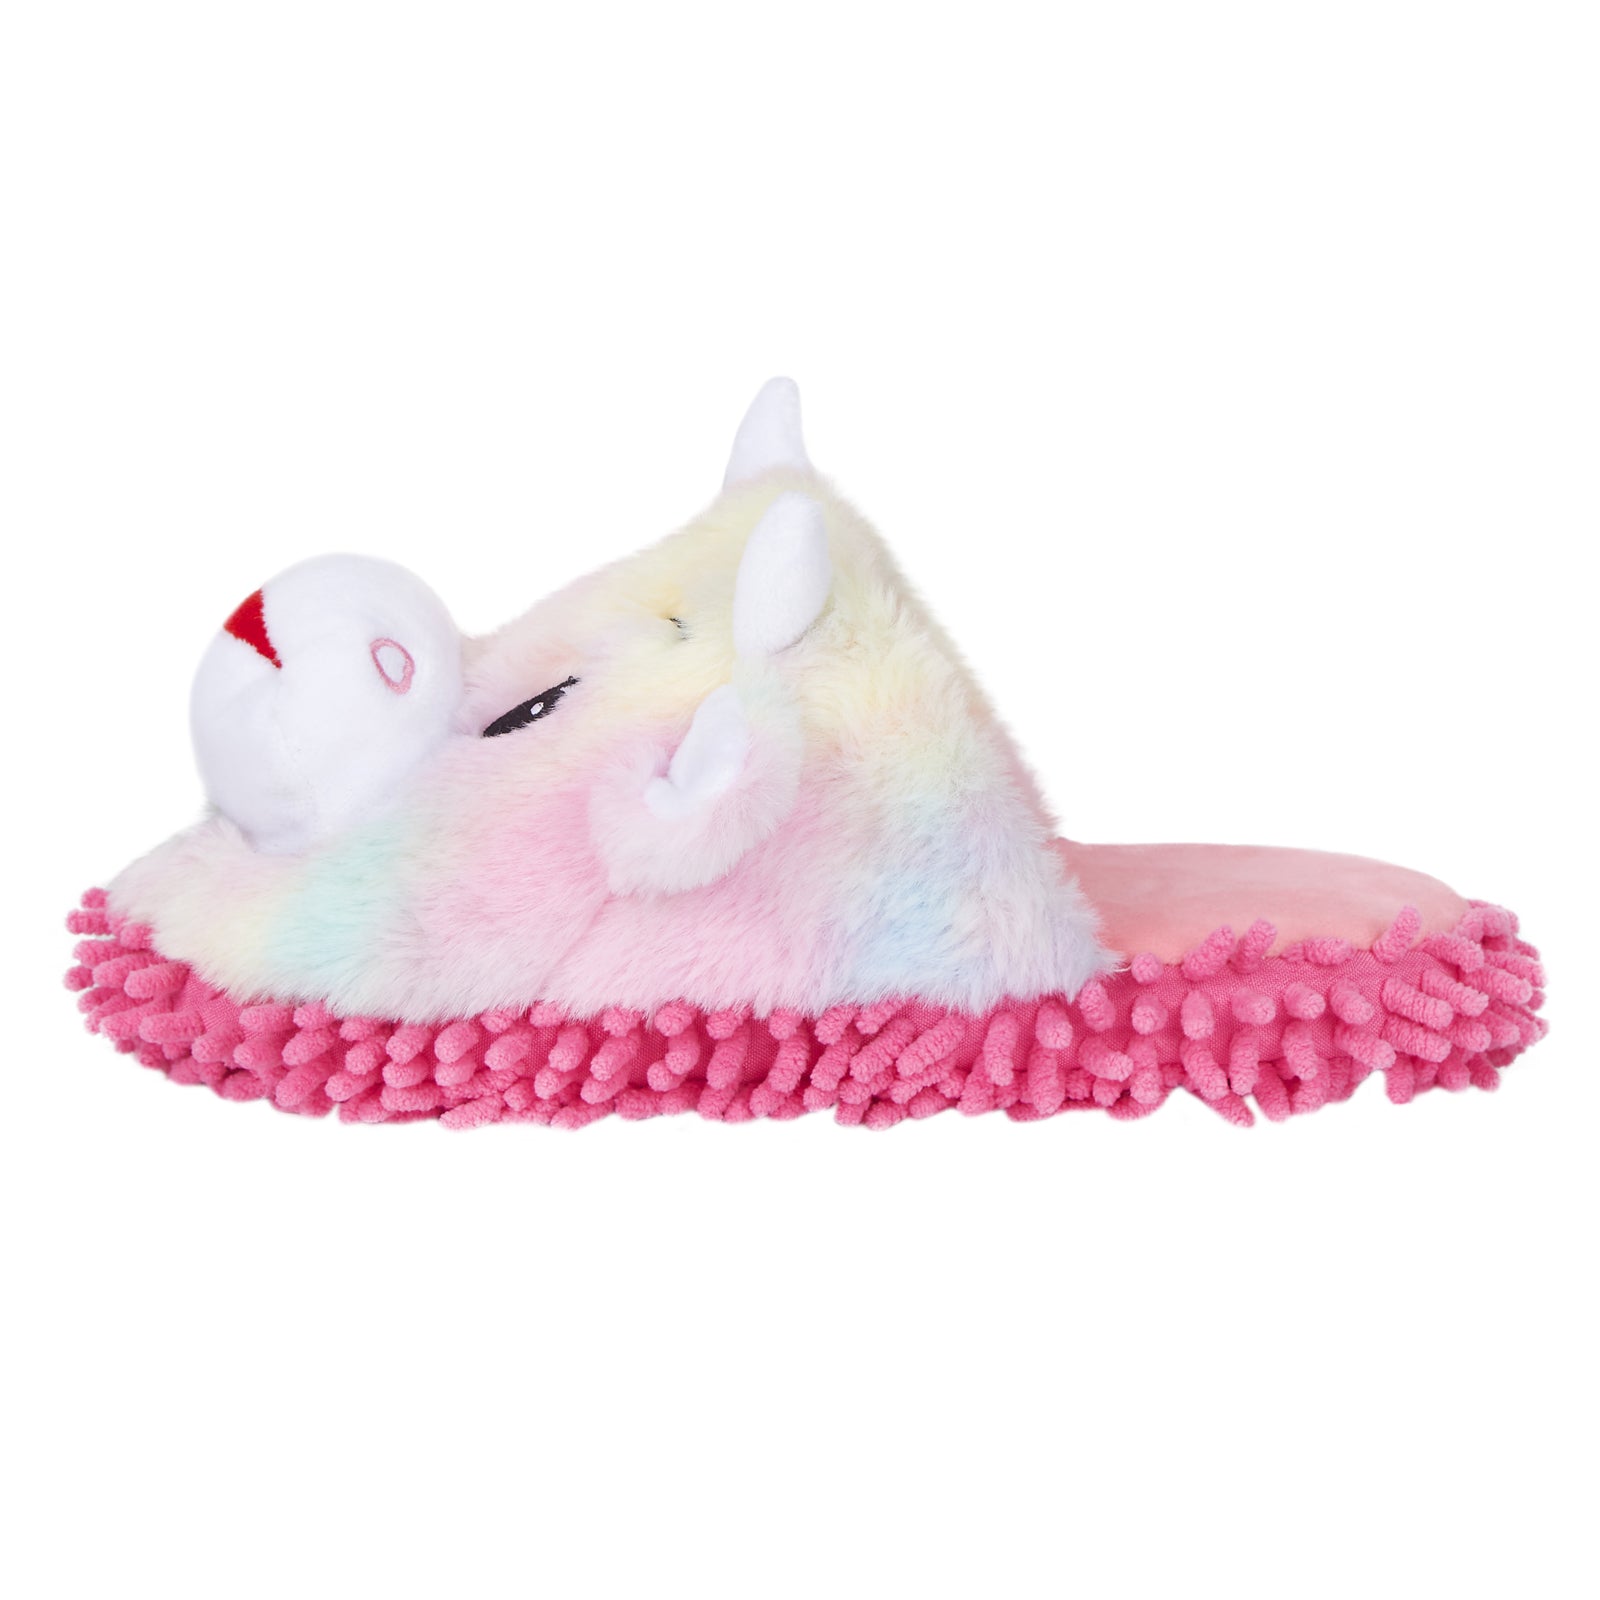 Cute Rainbow Cow Mop Slippers Warm Fuzzy Microfiber Dusting Animal Slippers, Chenille Floor Cleaning Funny Mopping House Shoes Gifts For Girls/Women